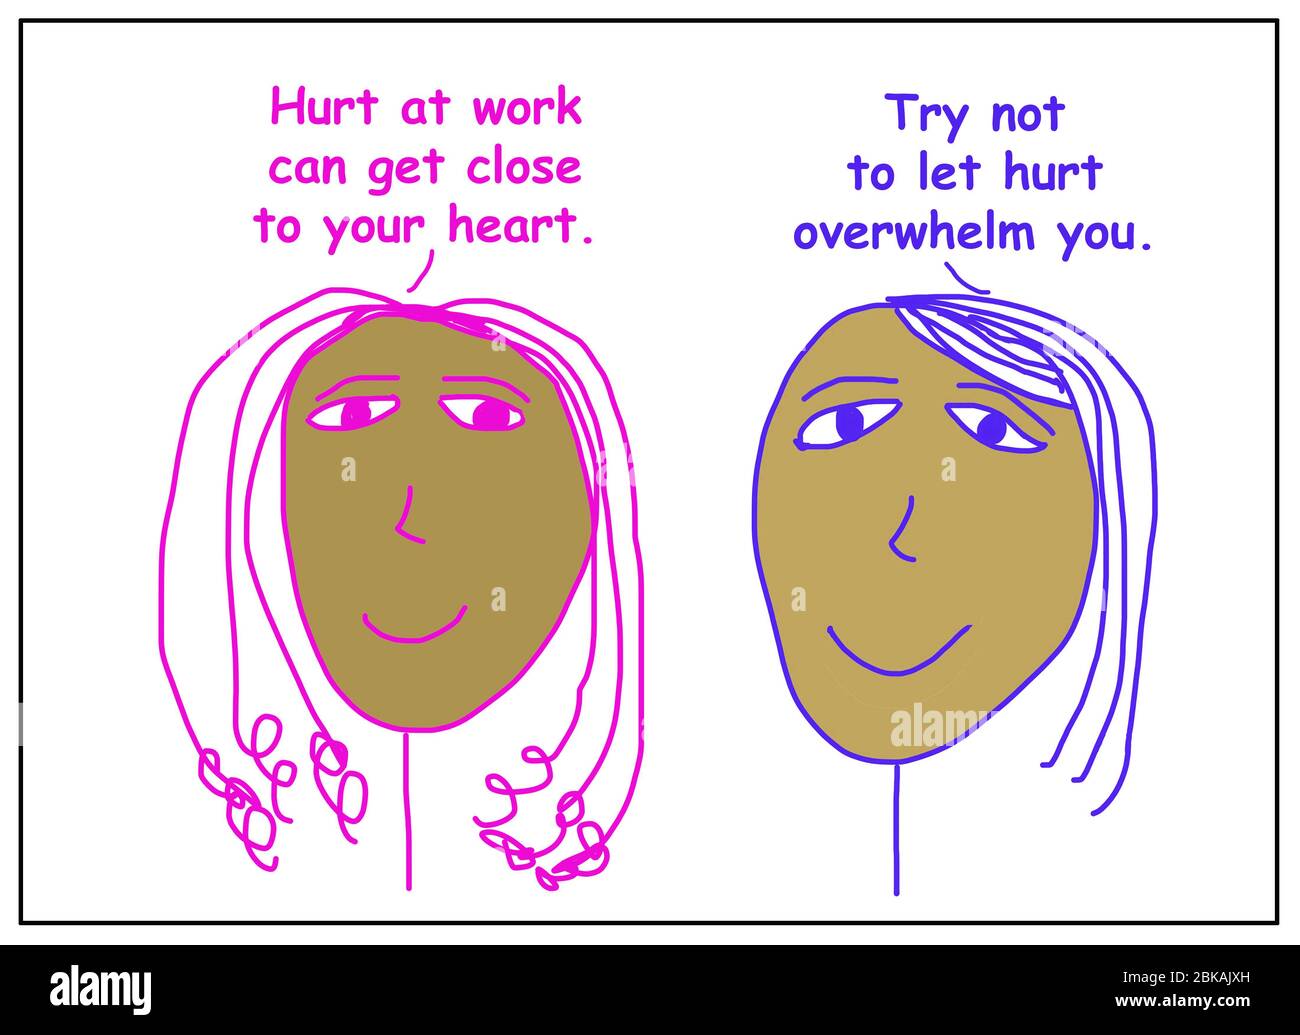 Color cartoon of two African-American women saying that hurt from a work interaction can get close to the heart and to not let that overwhelm you. Stock Photo